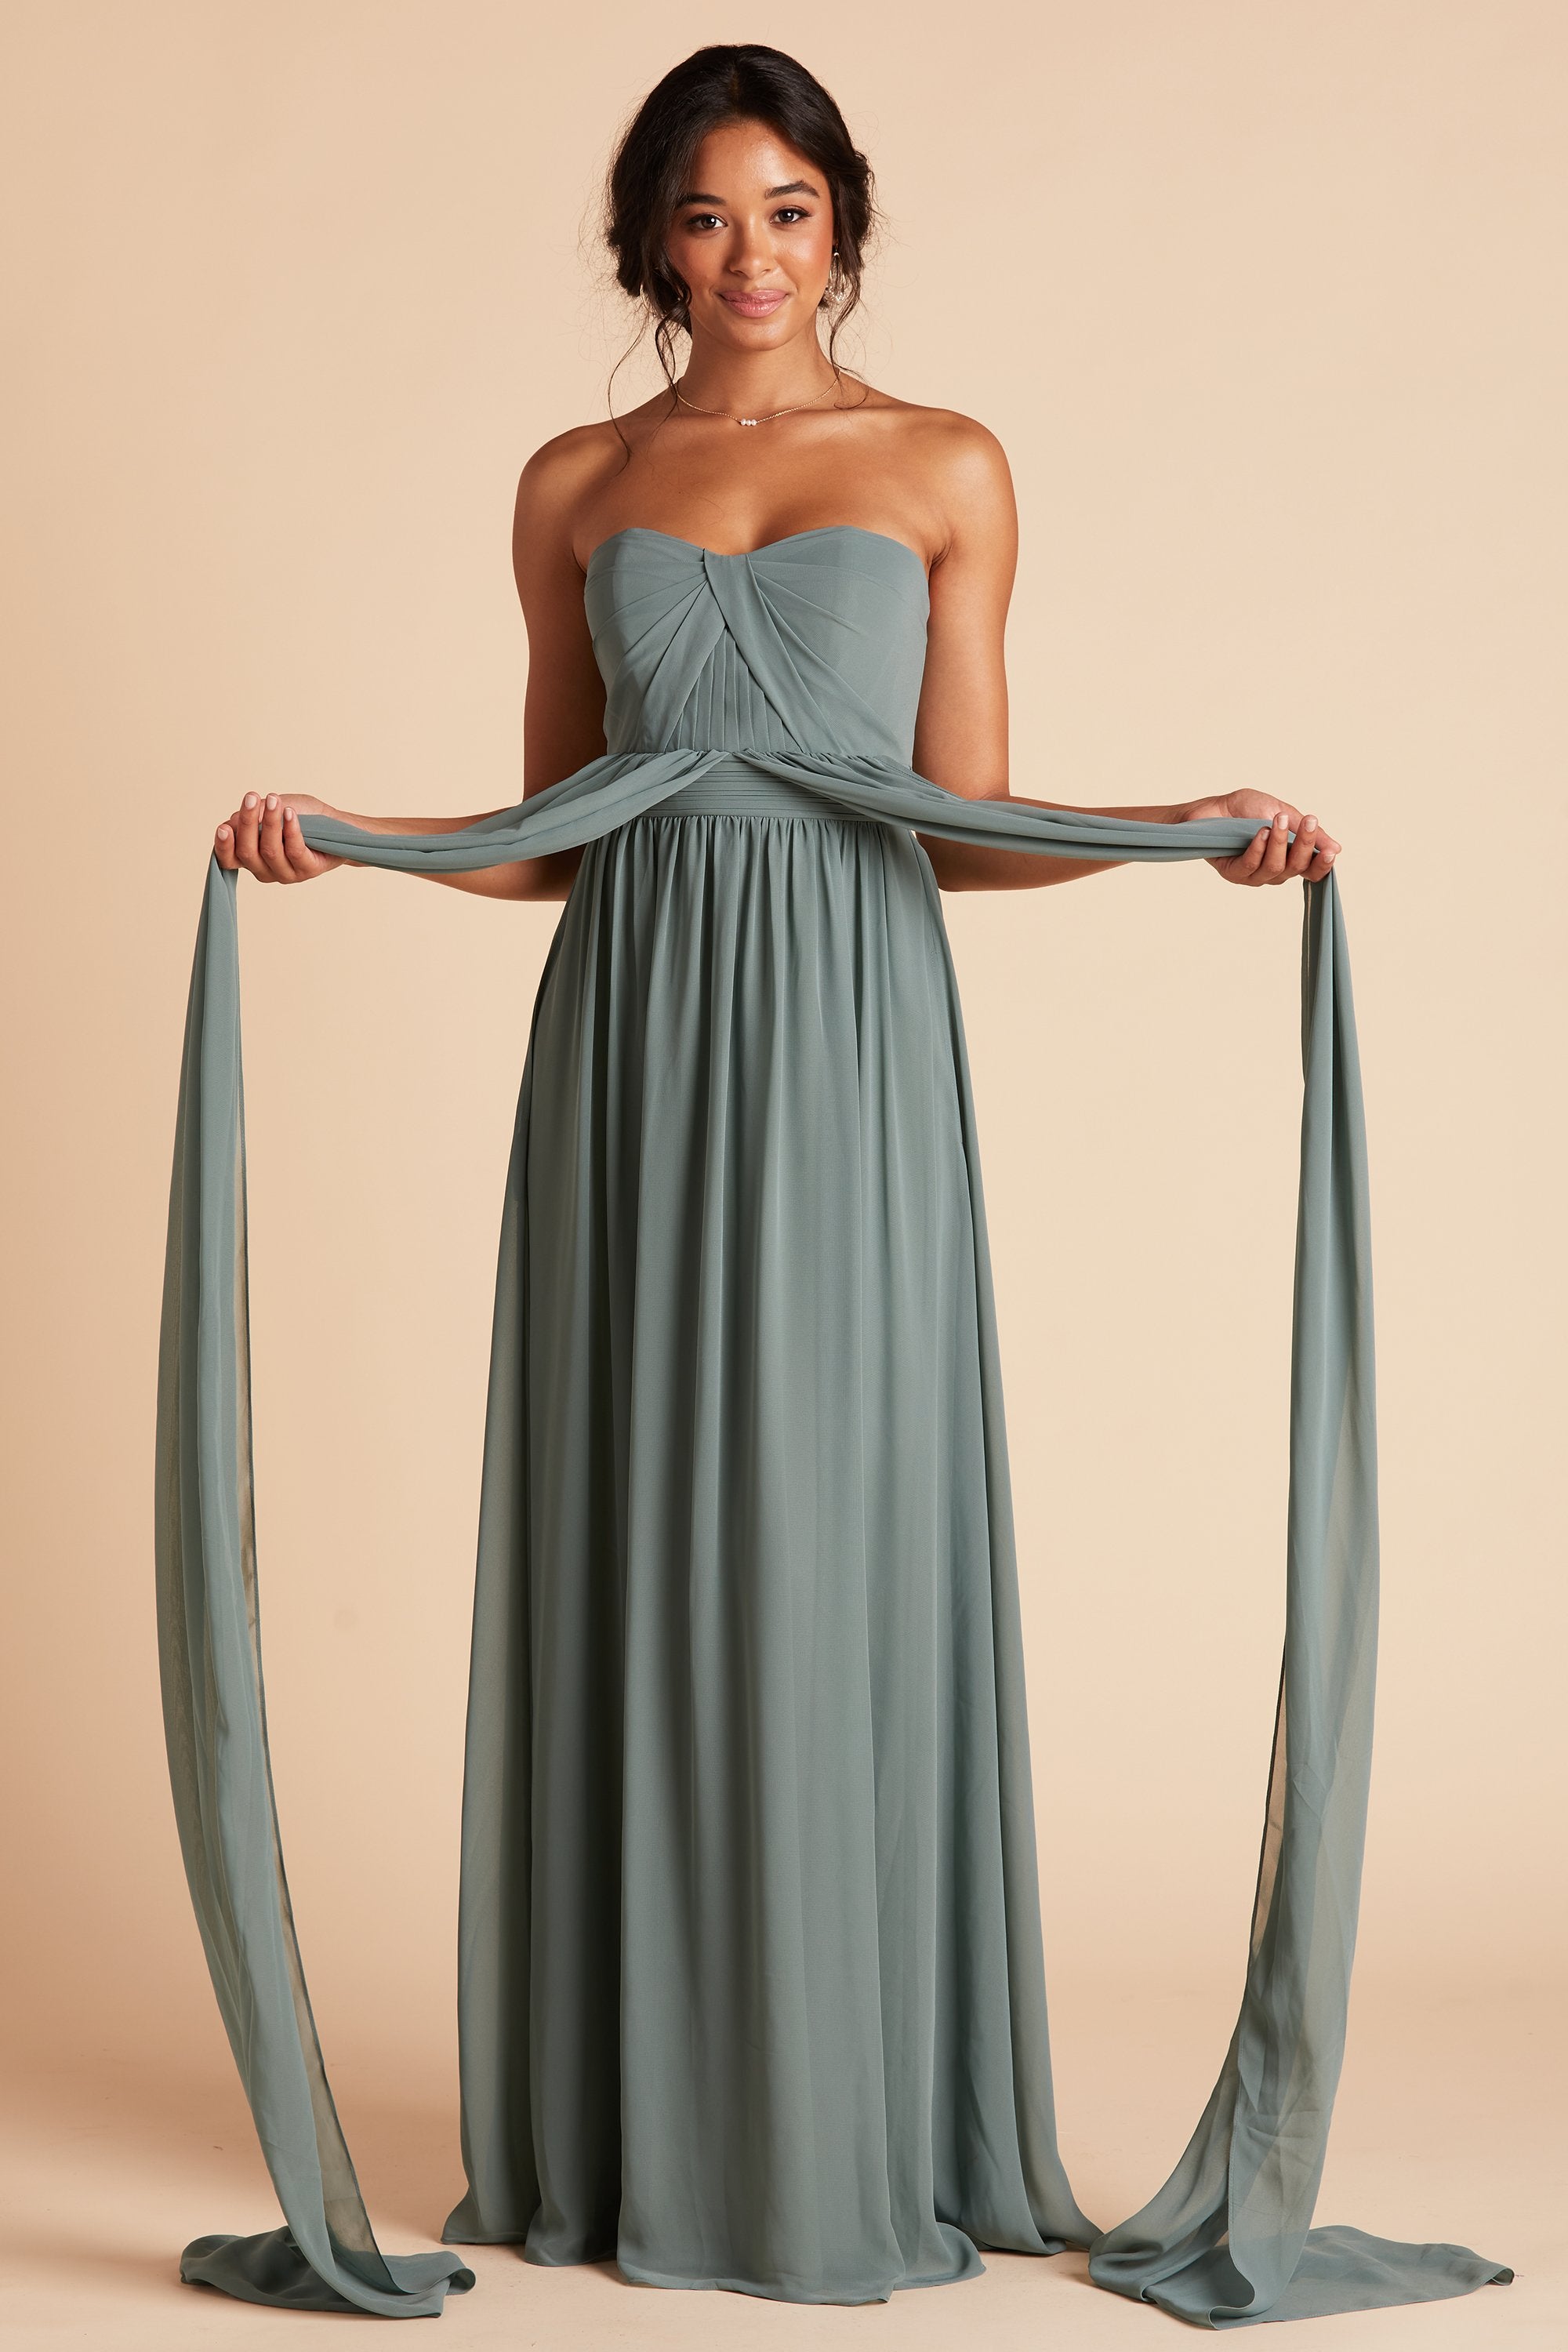 Front view of the Grace Convertible Bridesmaid Dress in sea glass chiffon as the model holds a front streamer connected at the waist in each hand. The streamers are extra long, longer than the floor-length skirt.